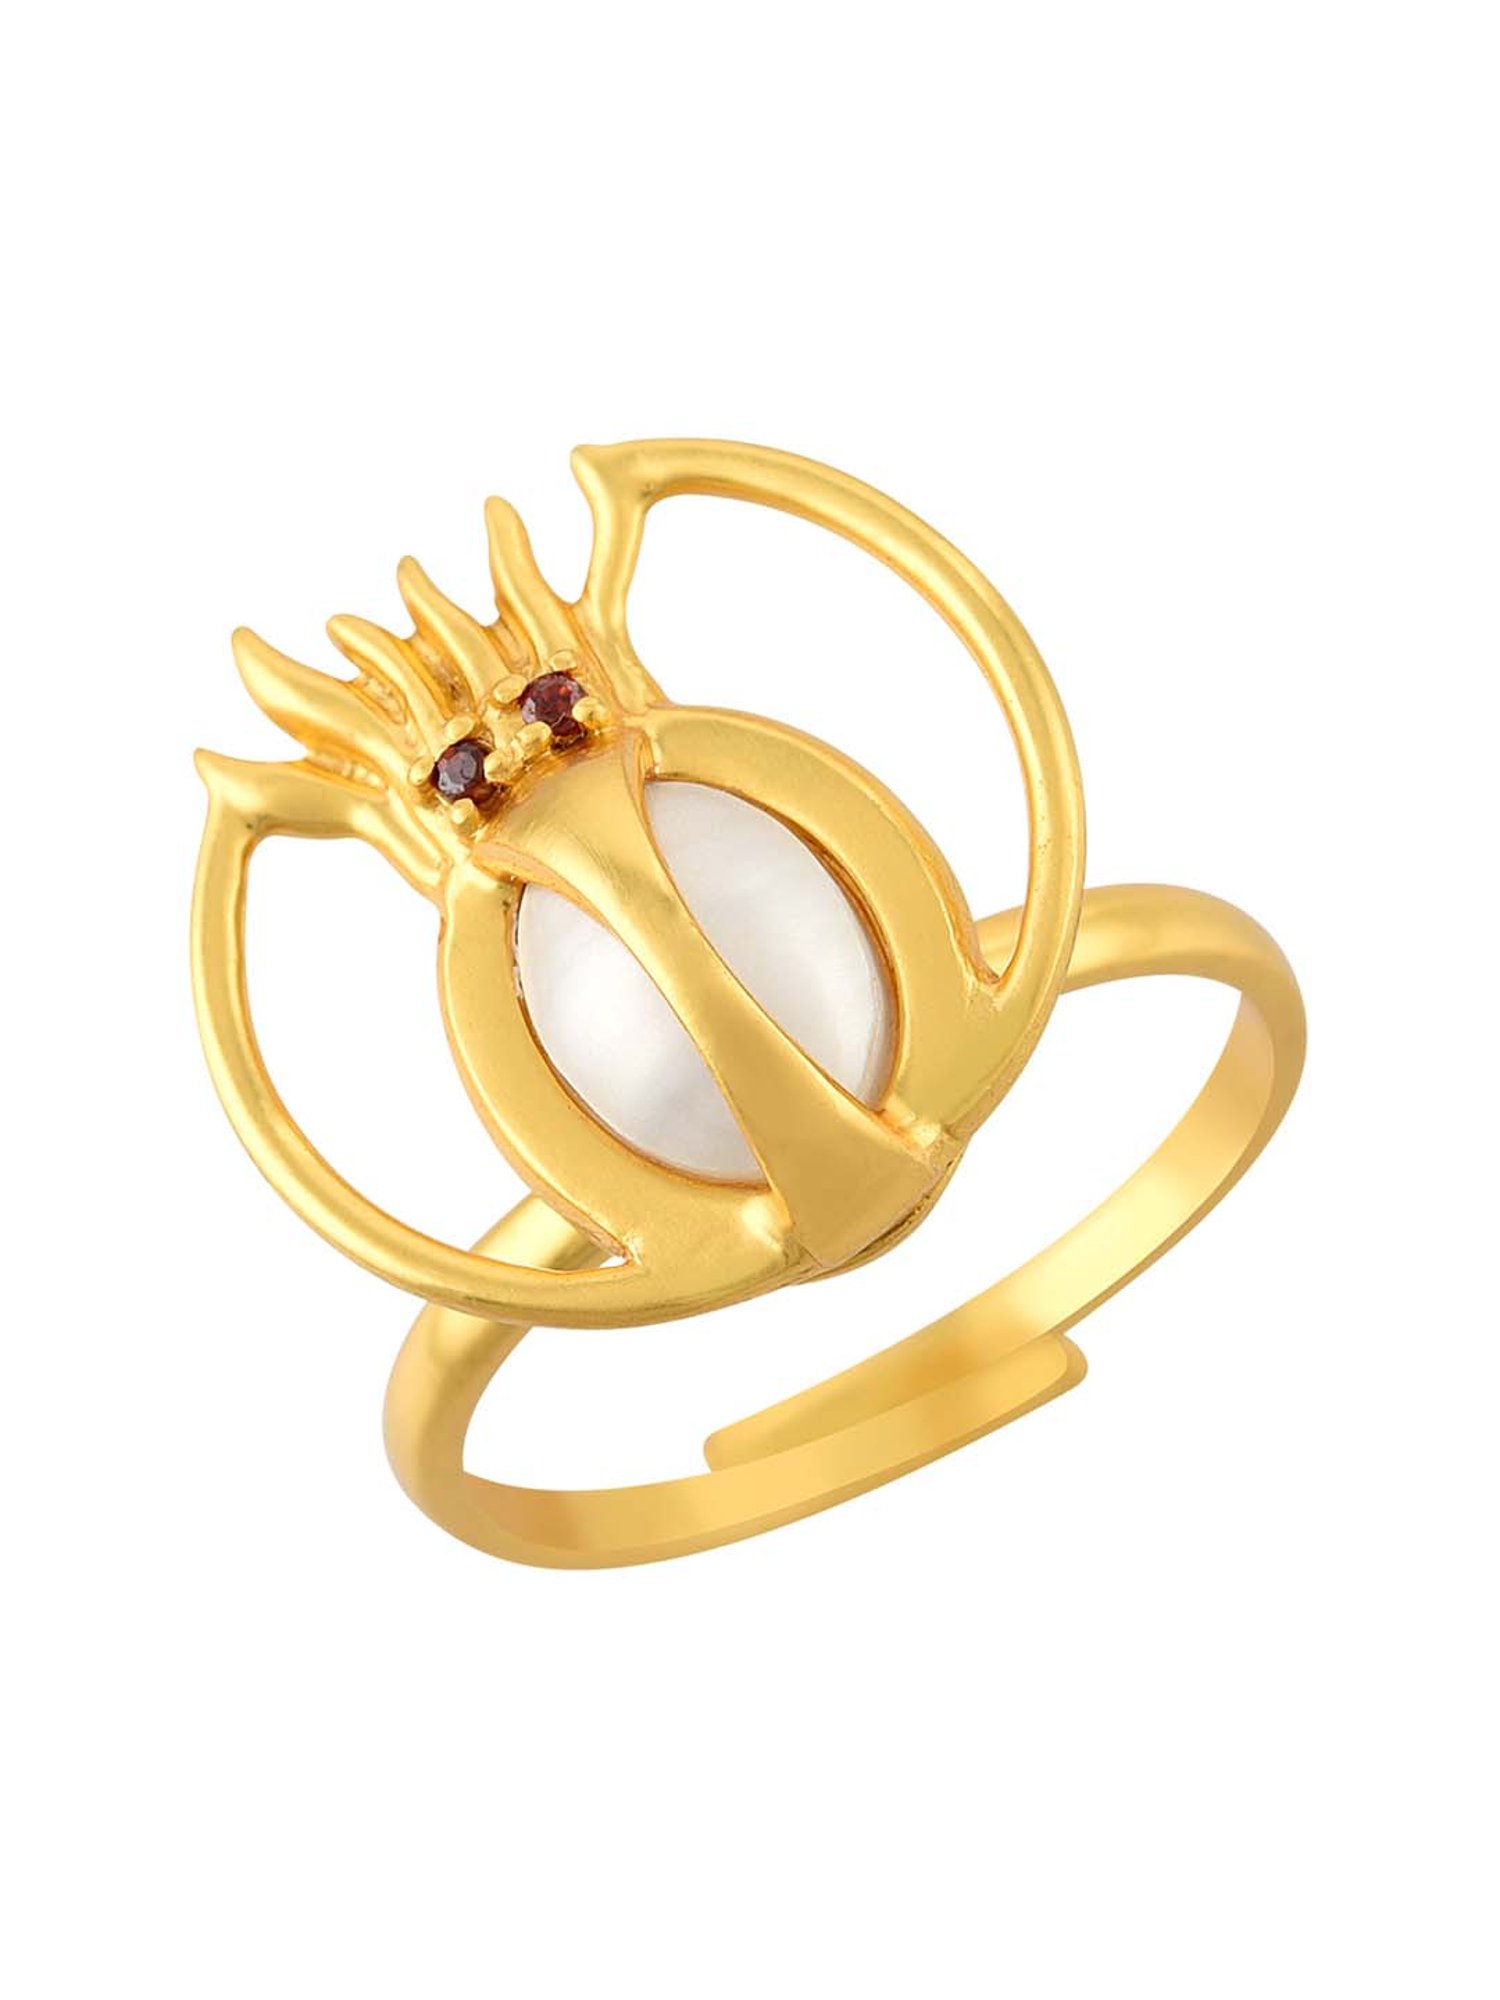 Panchadhatu Trishul Rings For Women (Best Gift For Girlfriend And Wife) -  Buy Panchadhatu Trishul Rings For Women (Best Gift For Girlfriend And Wife)  at Best Price in SYBazzar